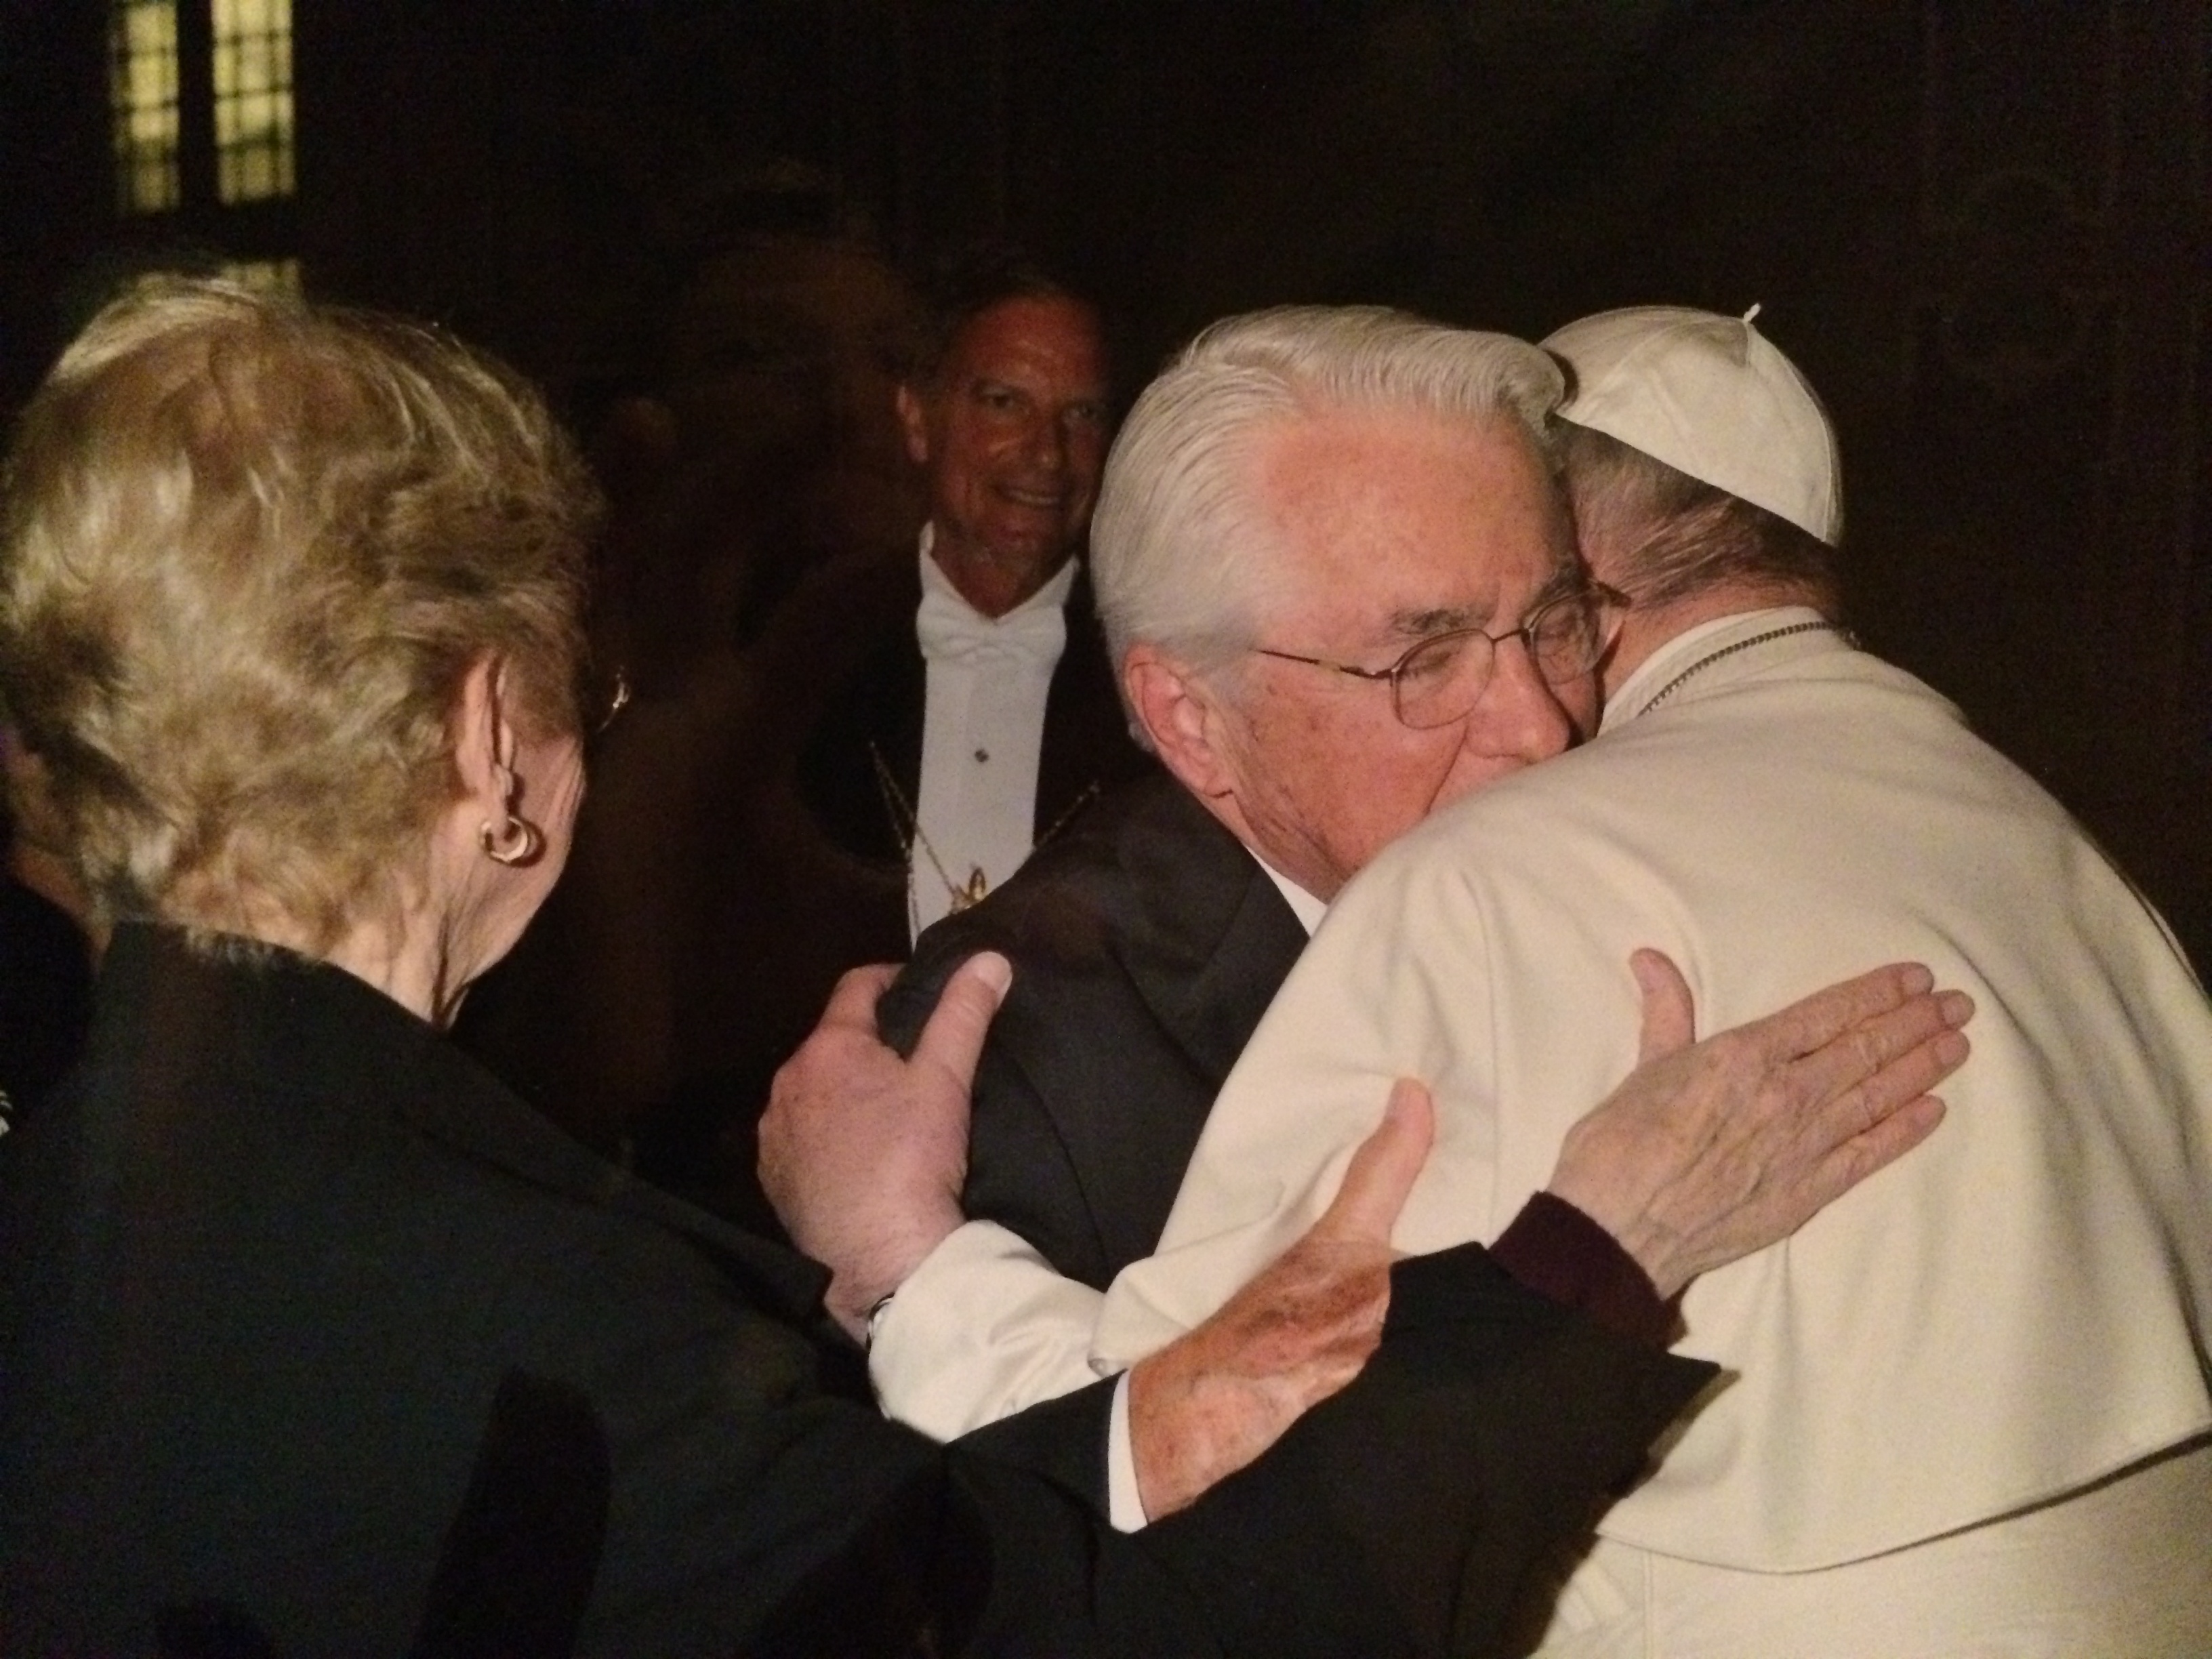 Gene Frey embraces Francis as wife, Mary, looks on, placing her hand on Francis' arm  (Vatican photo)